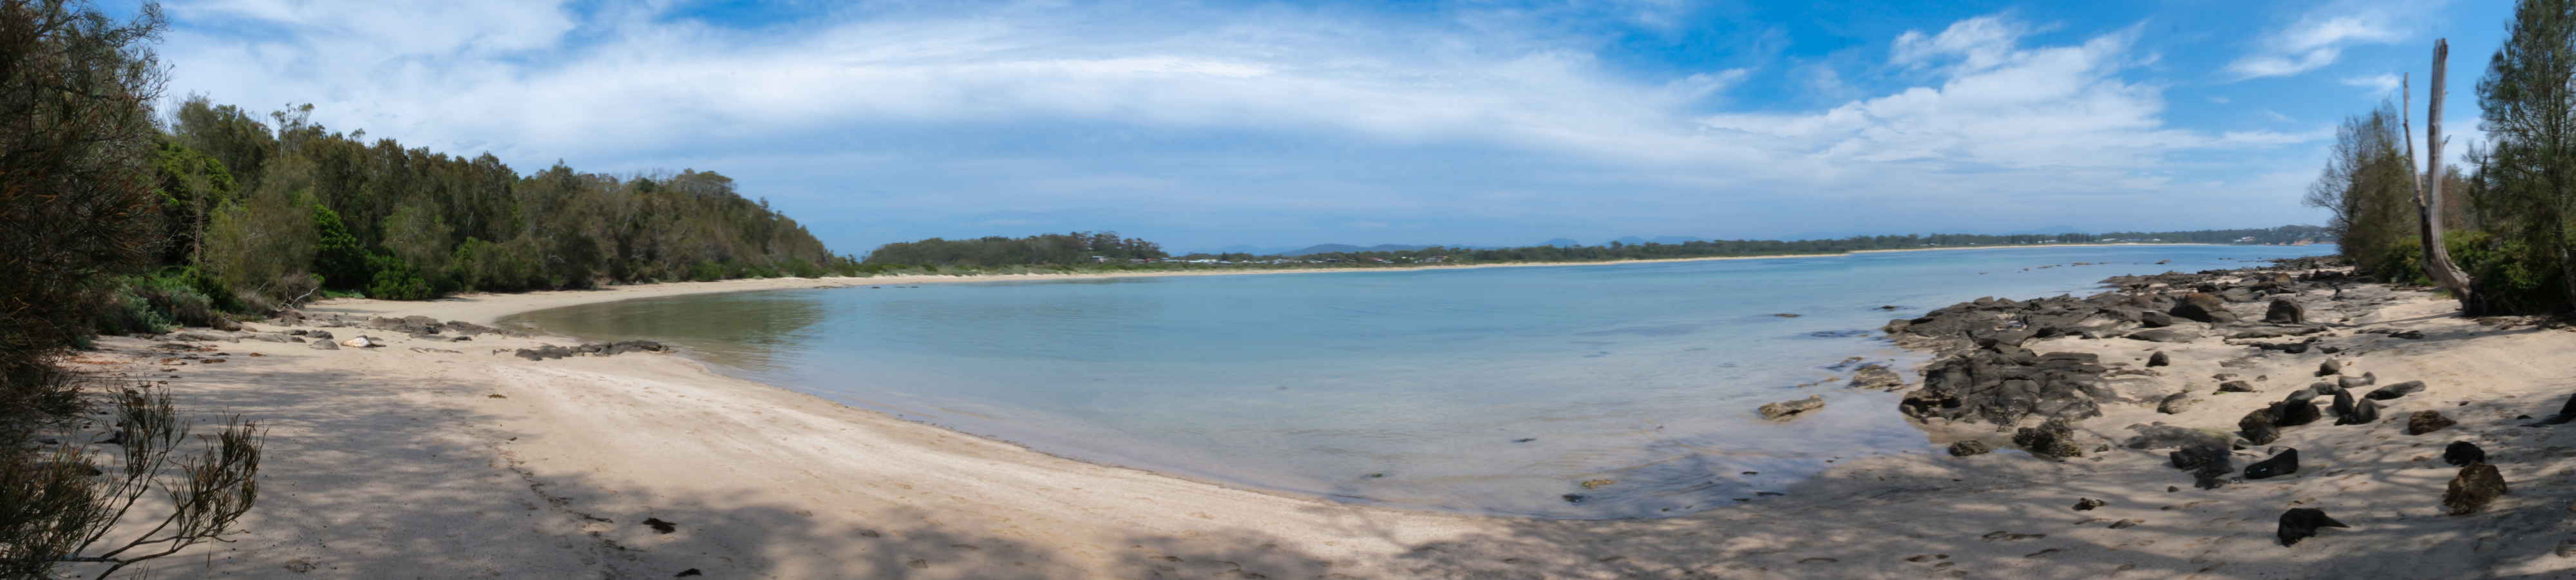 Broulee_Bay_NSW_AU_Photos_1134.png